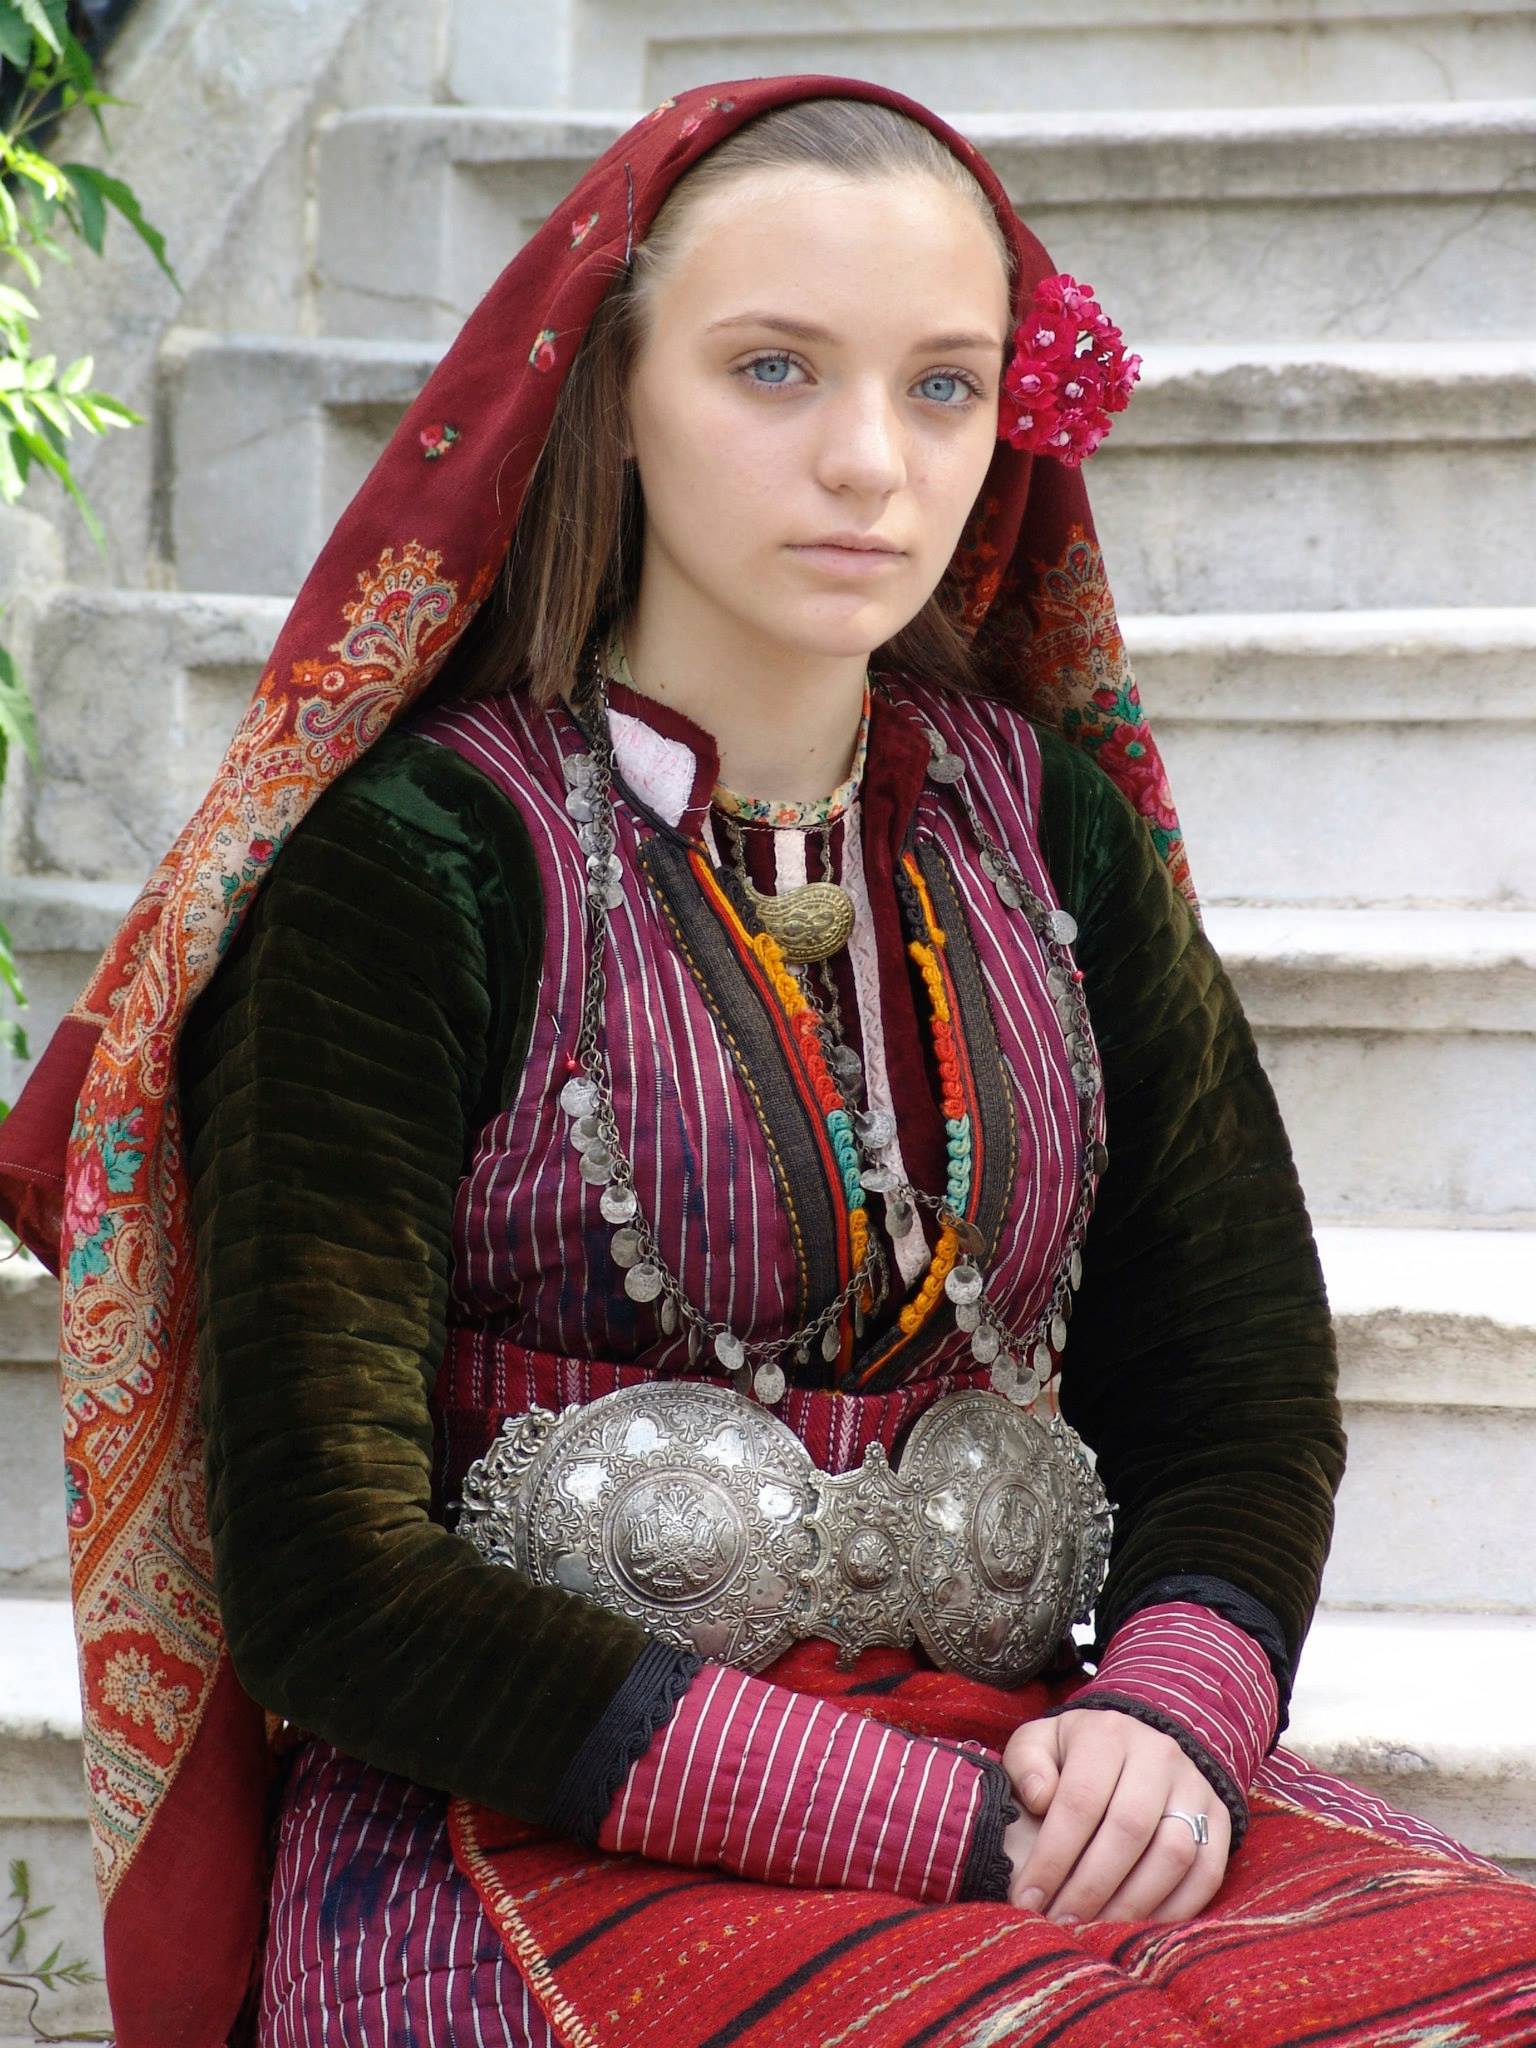 Bulgarian Women In Traditional Dress Image Abyss